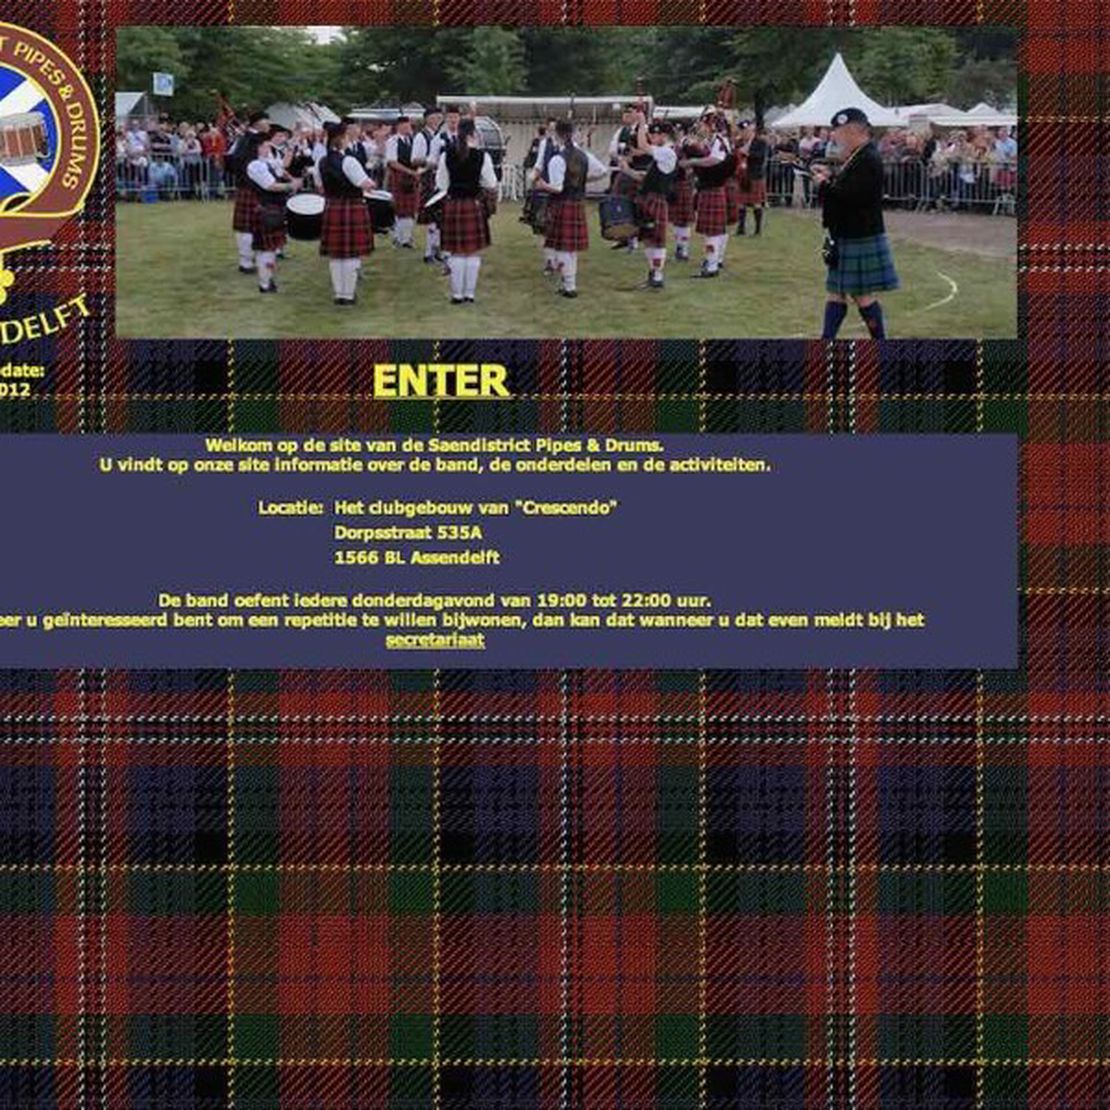 saendistrict pipes and drums